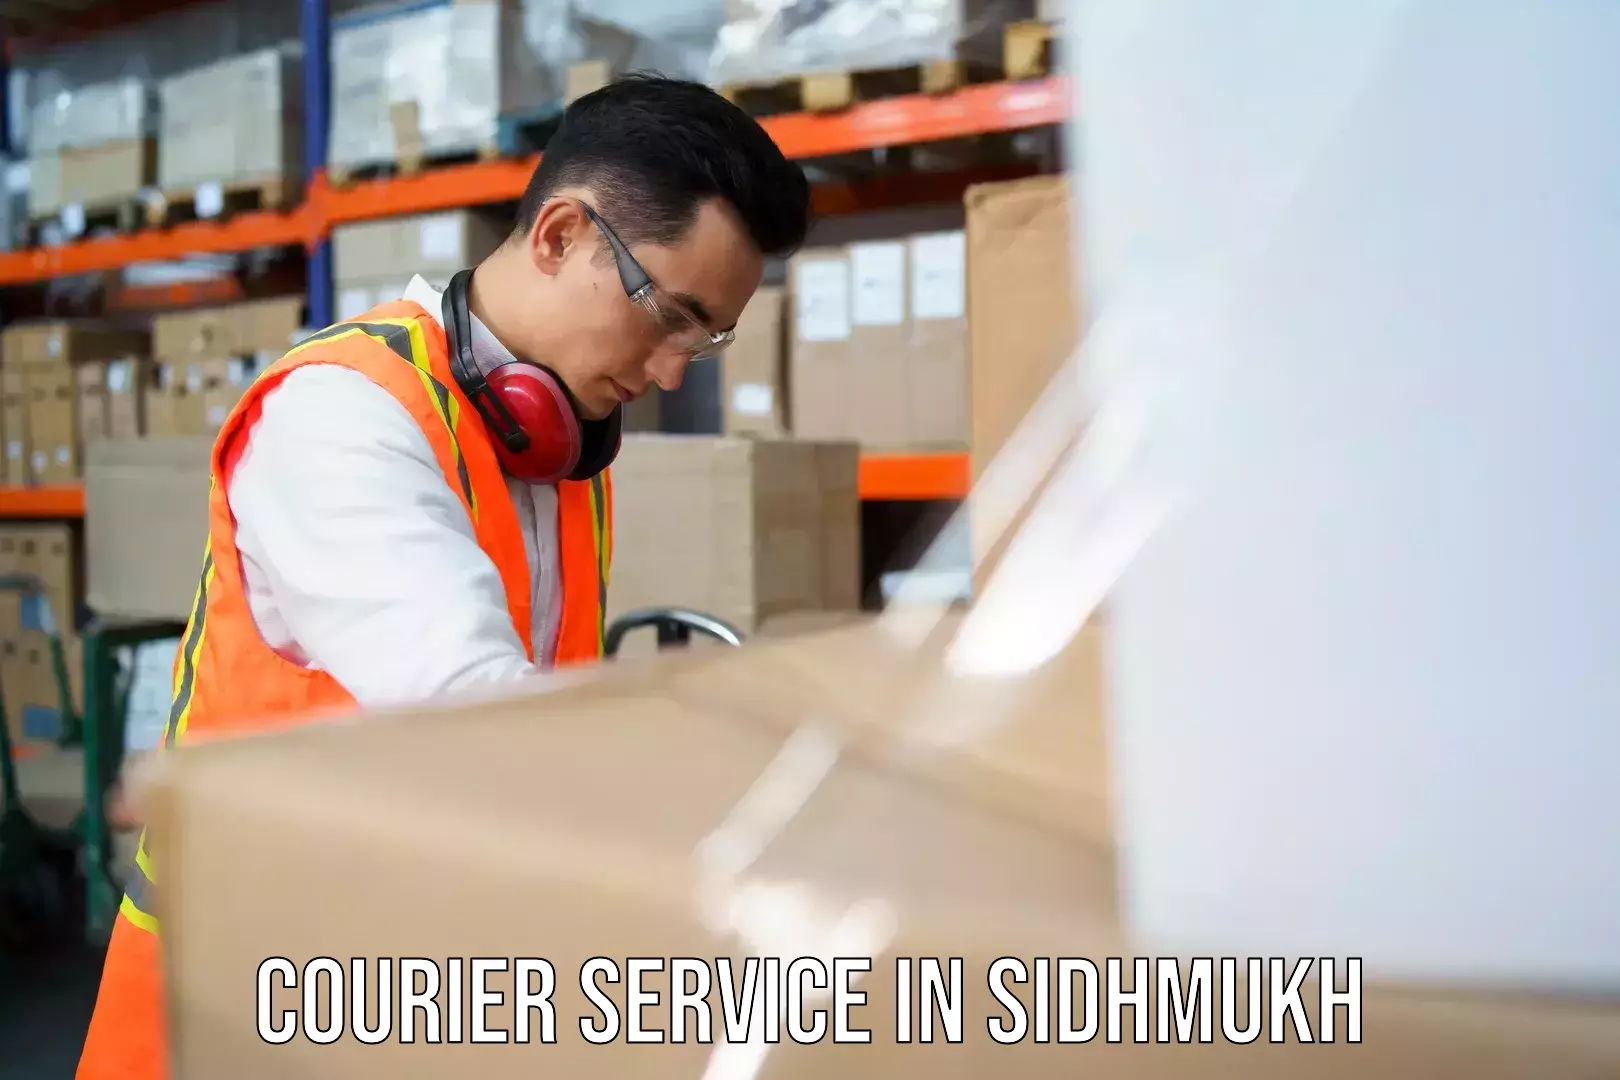 Cost-effective freight solutions in Sidhmukh